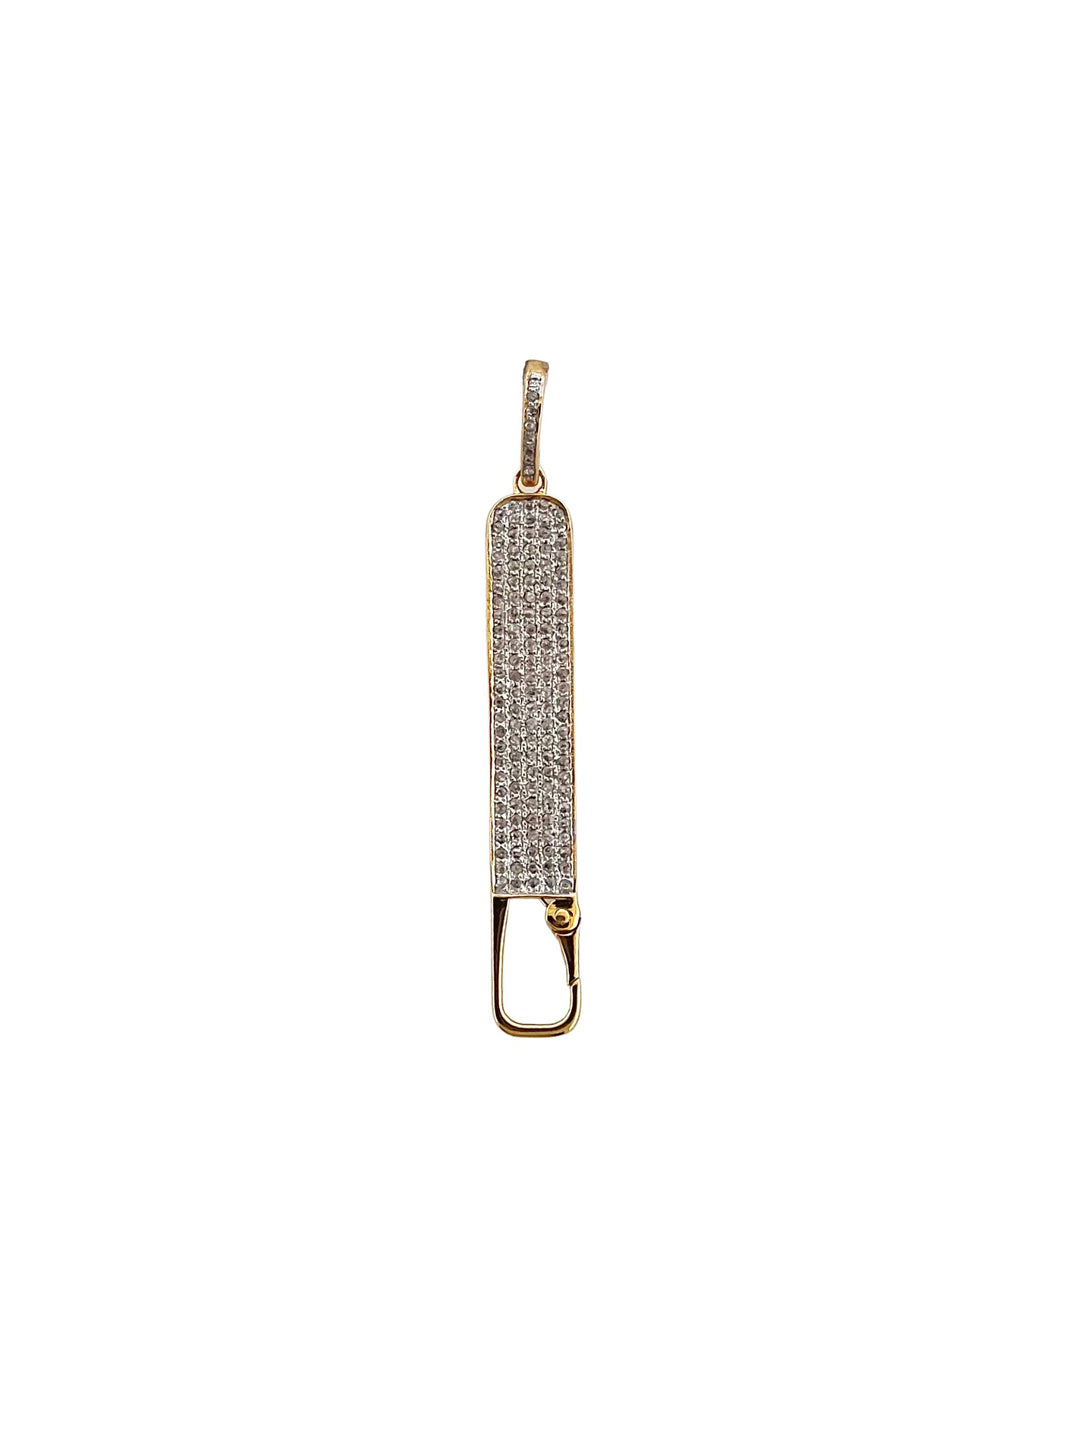 The Woods Fine Jewelry Pave Extender